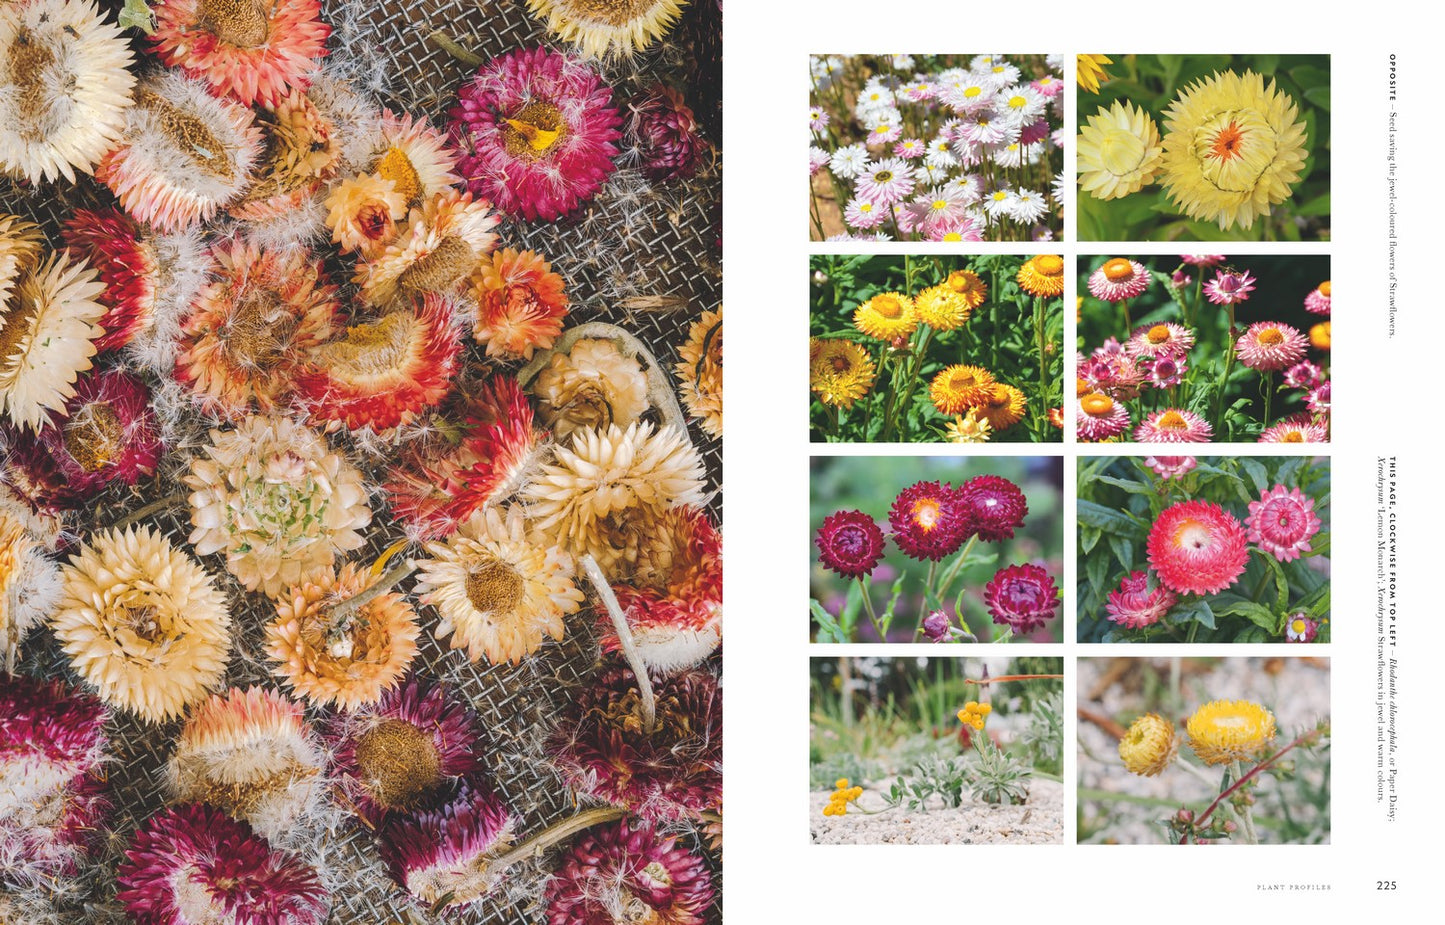 Super Bloom A field guide to flowers for every gardener By: Jac Semmler